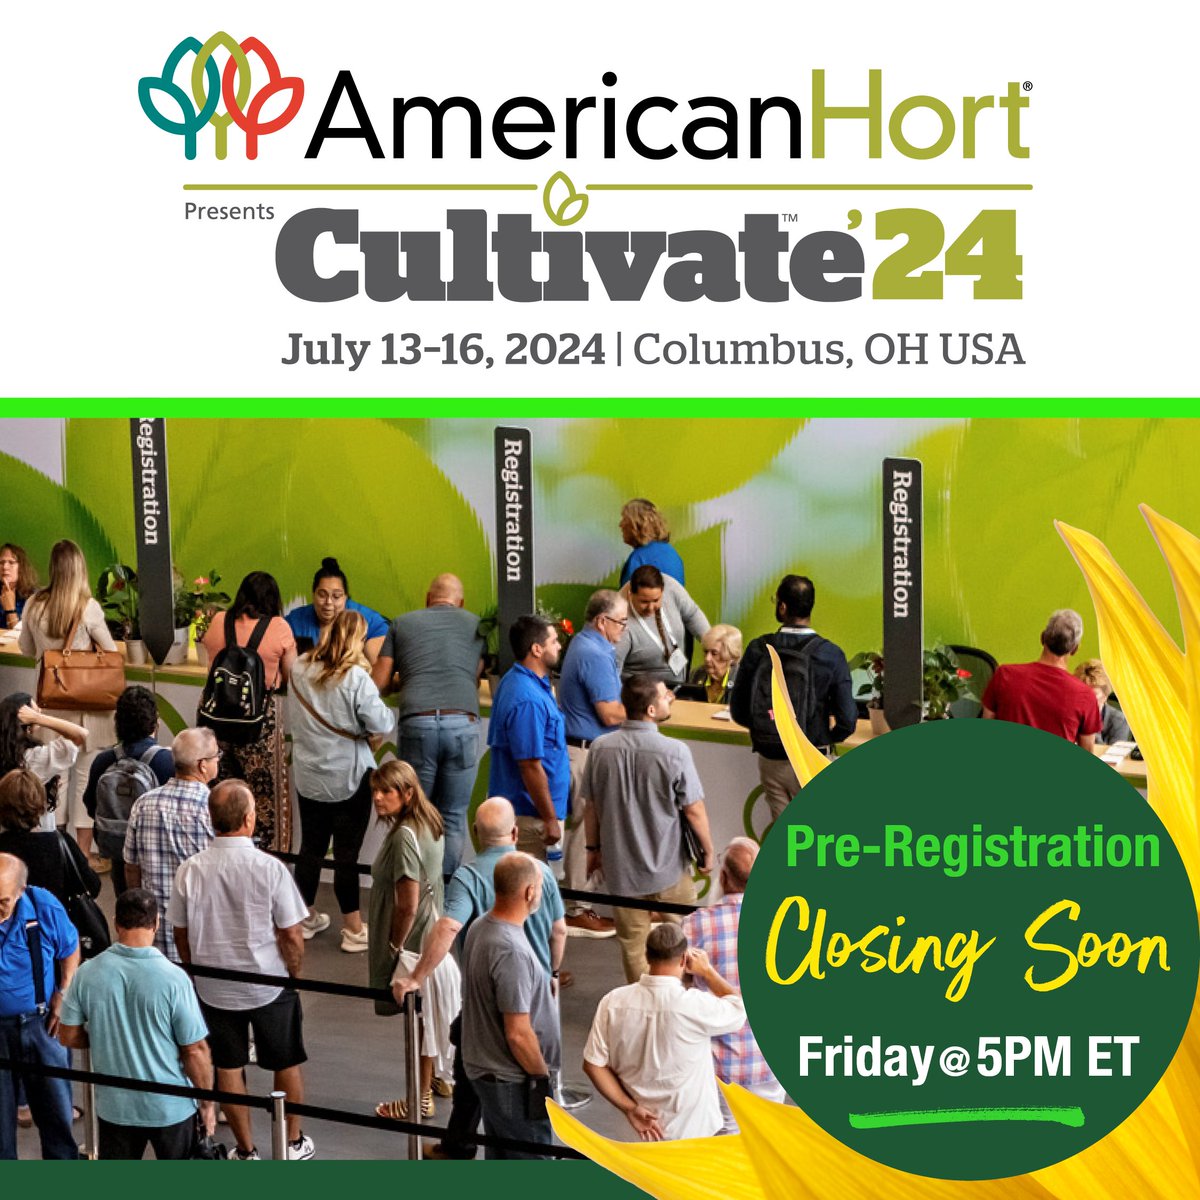 Skip the lines and access advance hotel booking options when you Pre-Register TODAY! #Cultivate24 Pre-Registration closes this Friday, February 23 at 5:00 PM ET. Get ready to join us in July by registering yourself and your team now at AmericanHort.org/Cultivate